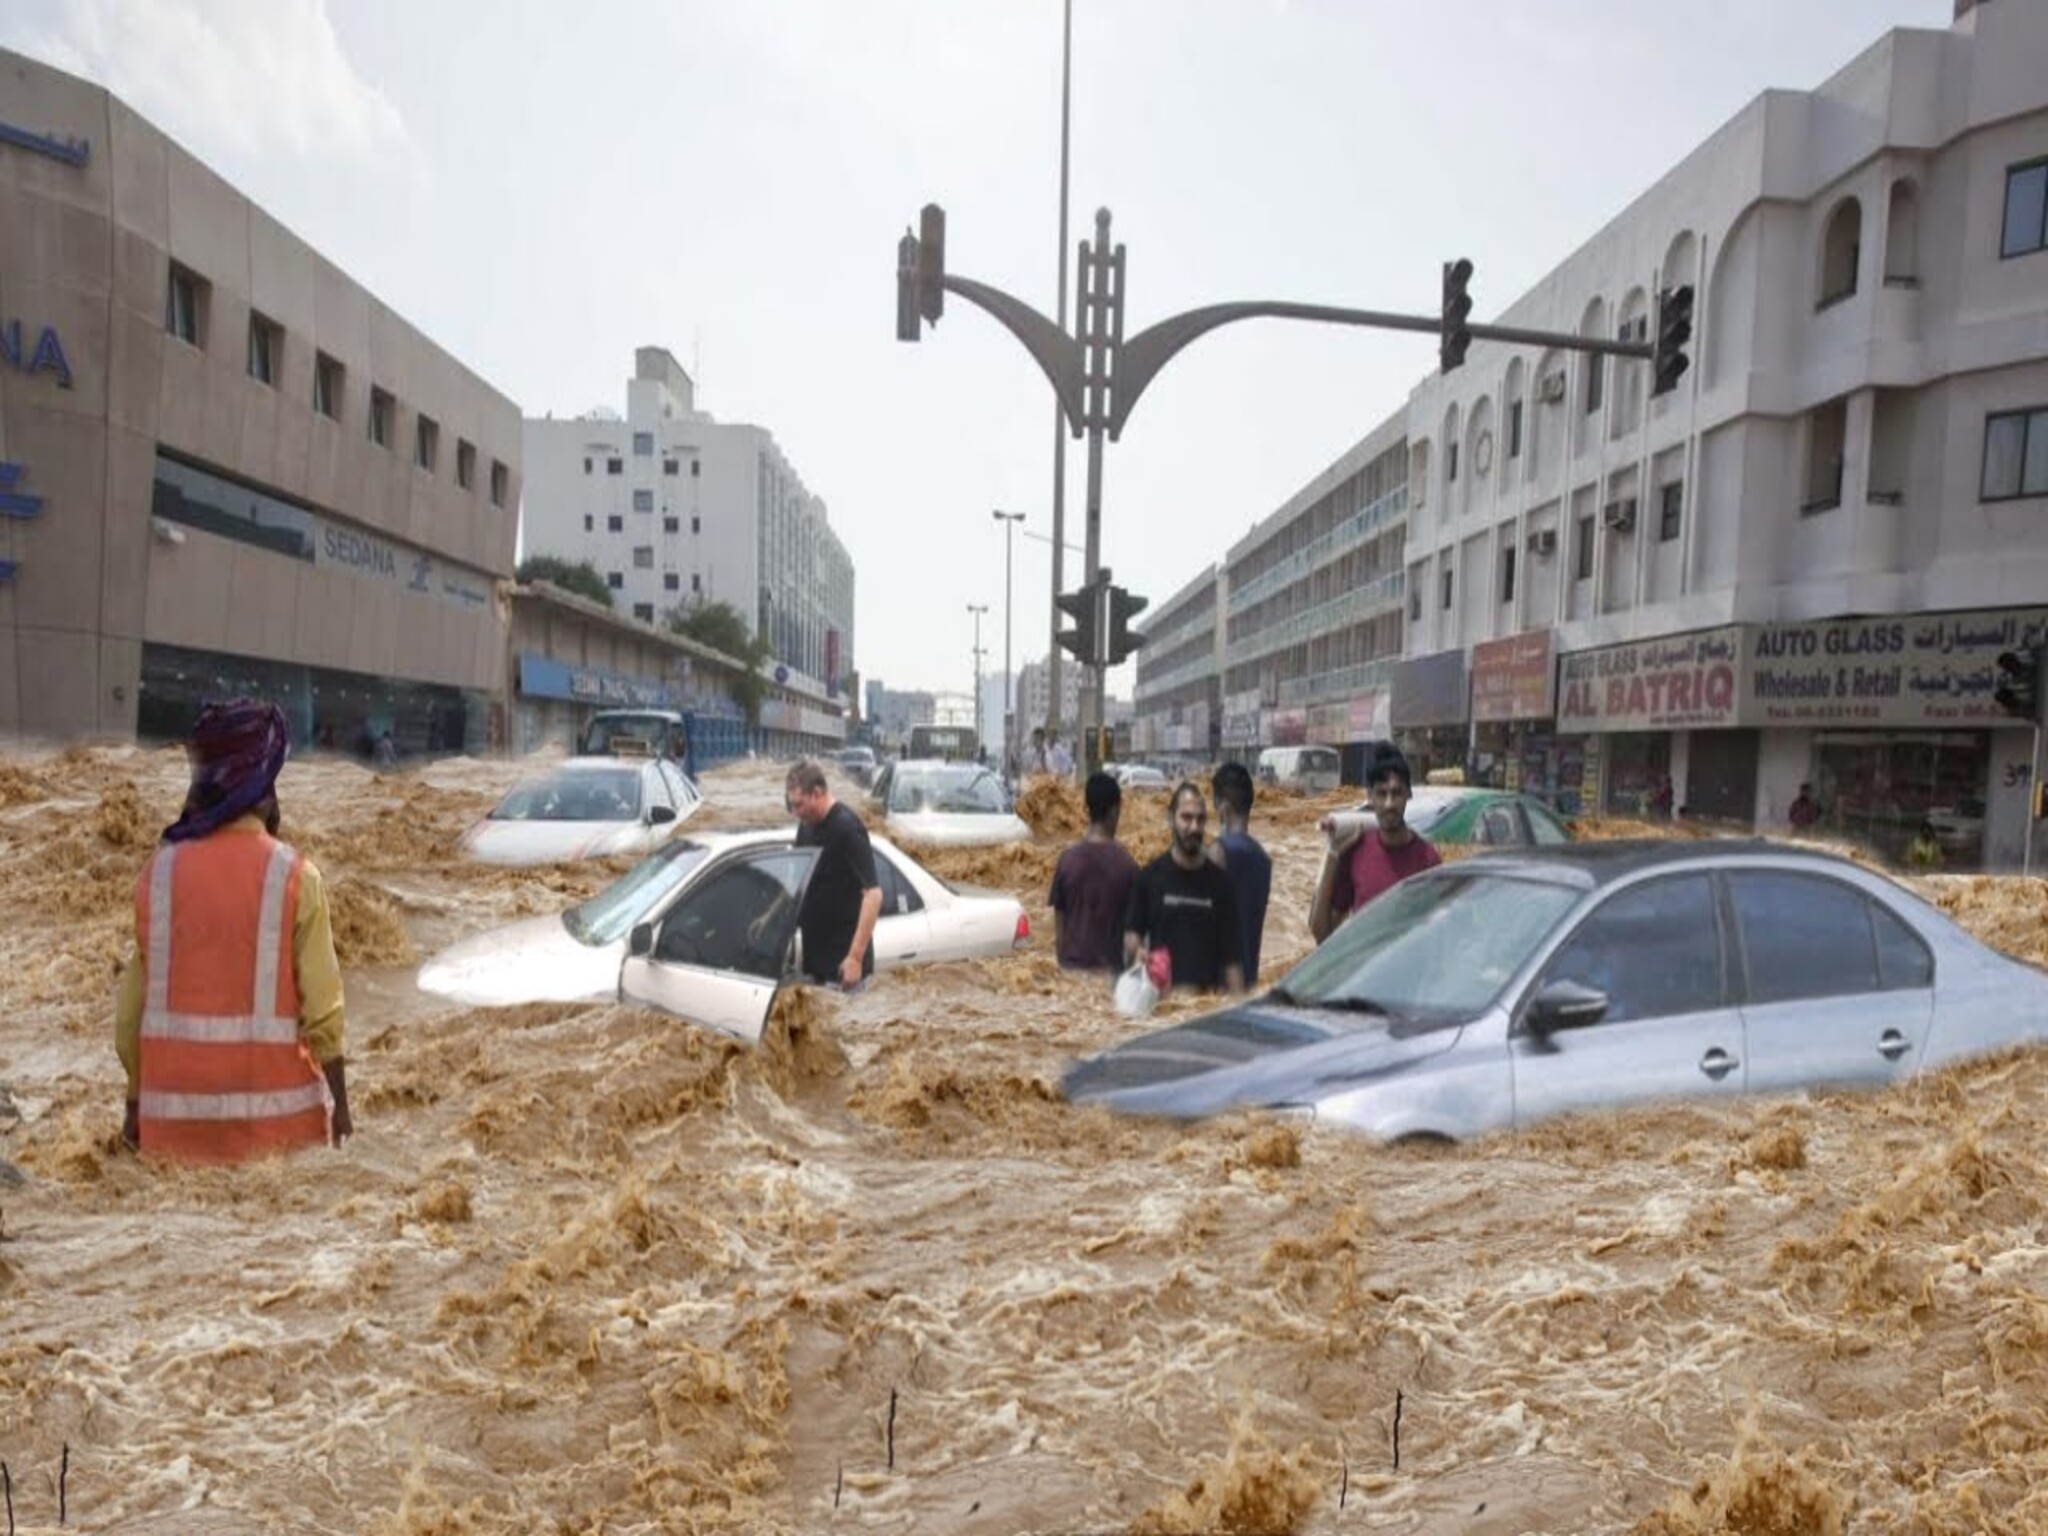 A storm hits areas in the Emirates, and meteorology warns of heavy rain tomorrow